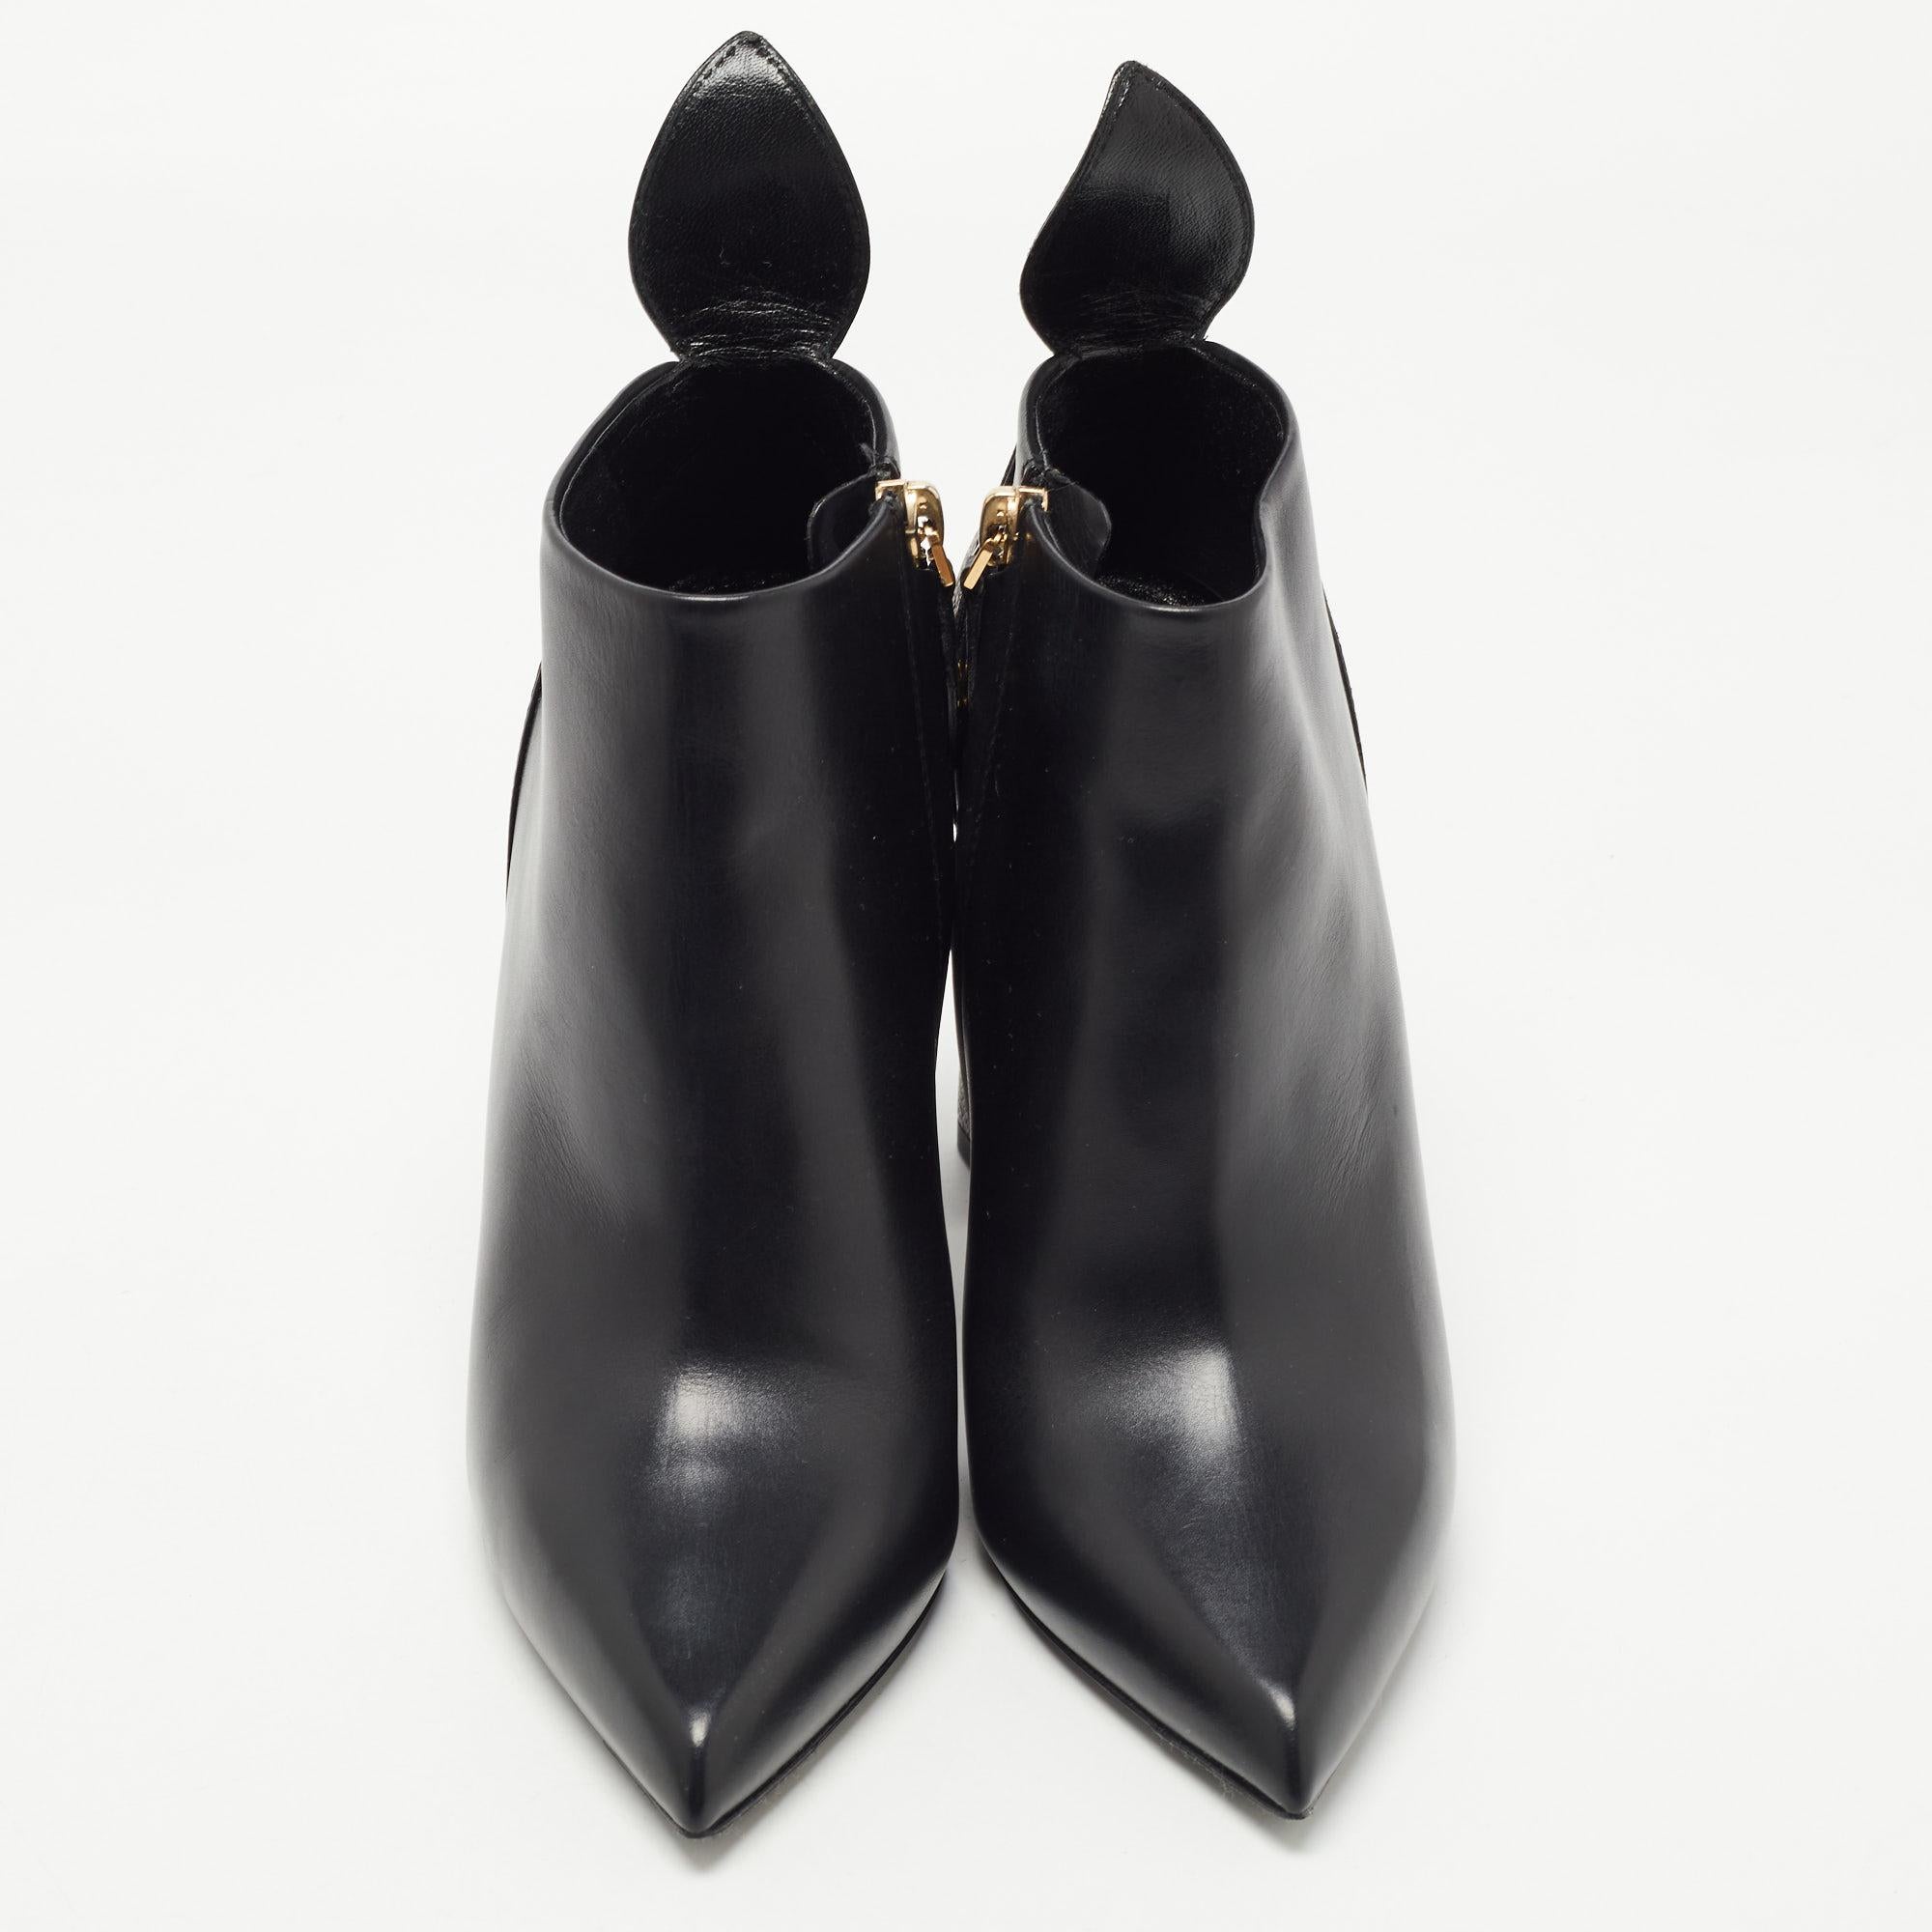 These ankle boots from Louis Vuitton were made to delight the tastes of all fashion-forward ladies. The pointed-toe ankle boots are covered in black leather and detailed with monogram canvas on the counters and on the flower-shaped heels. The boots